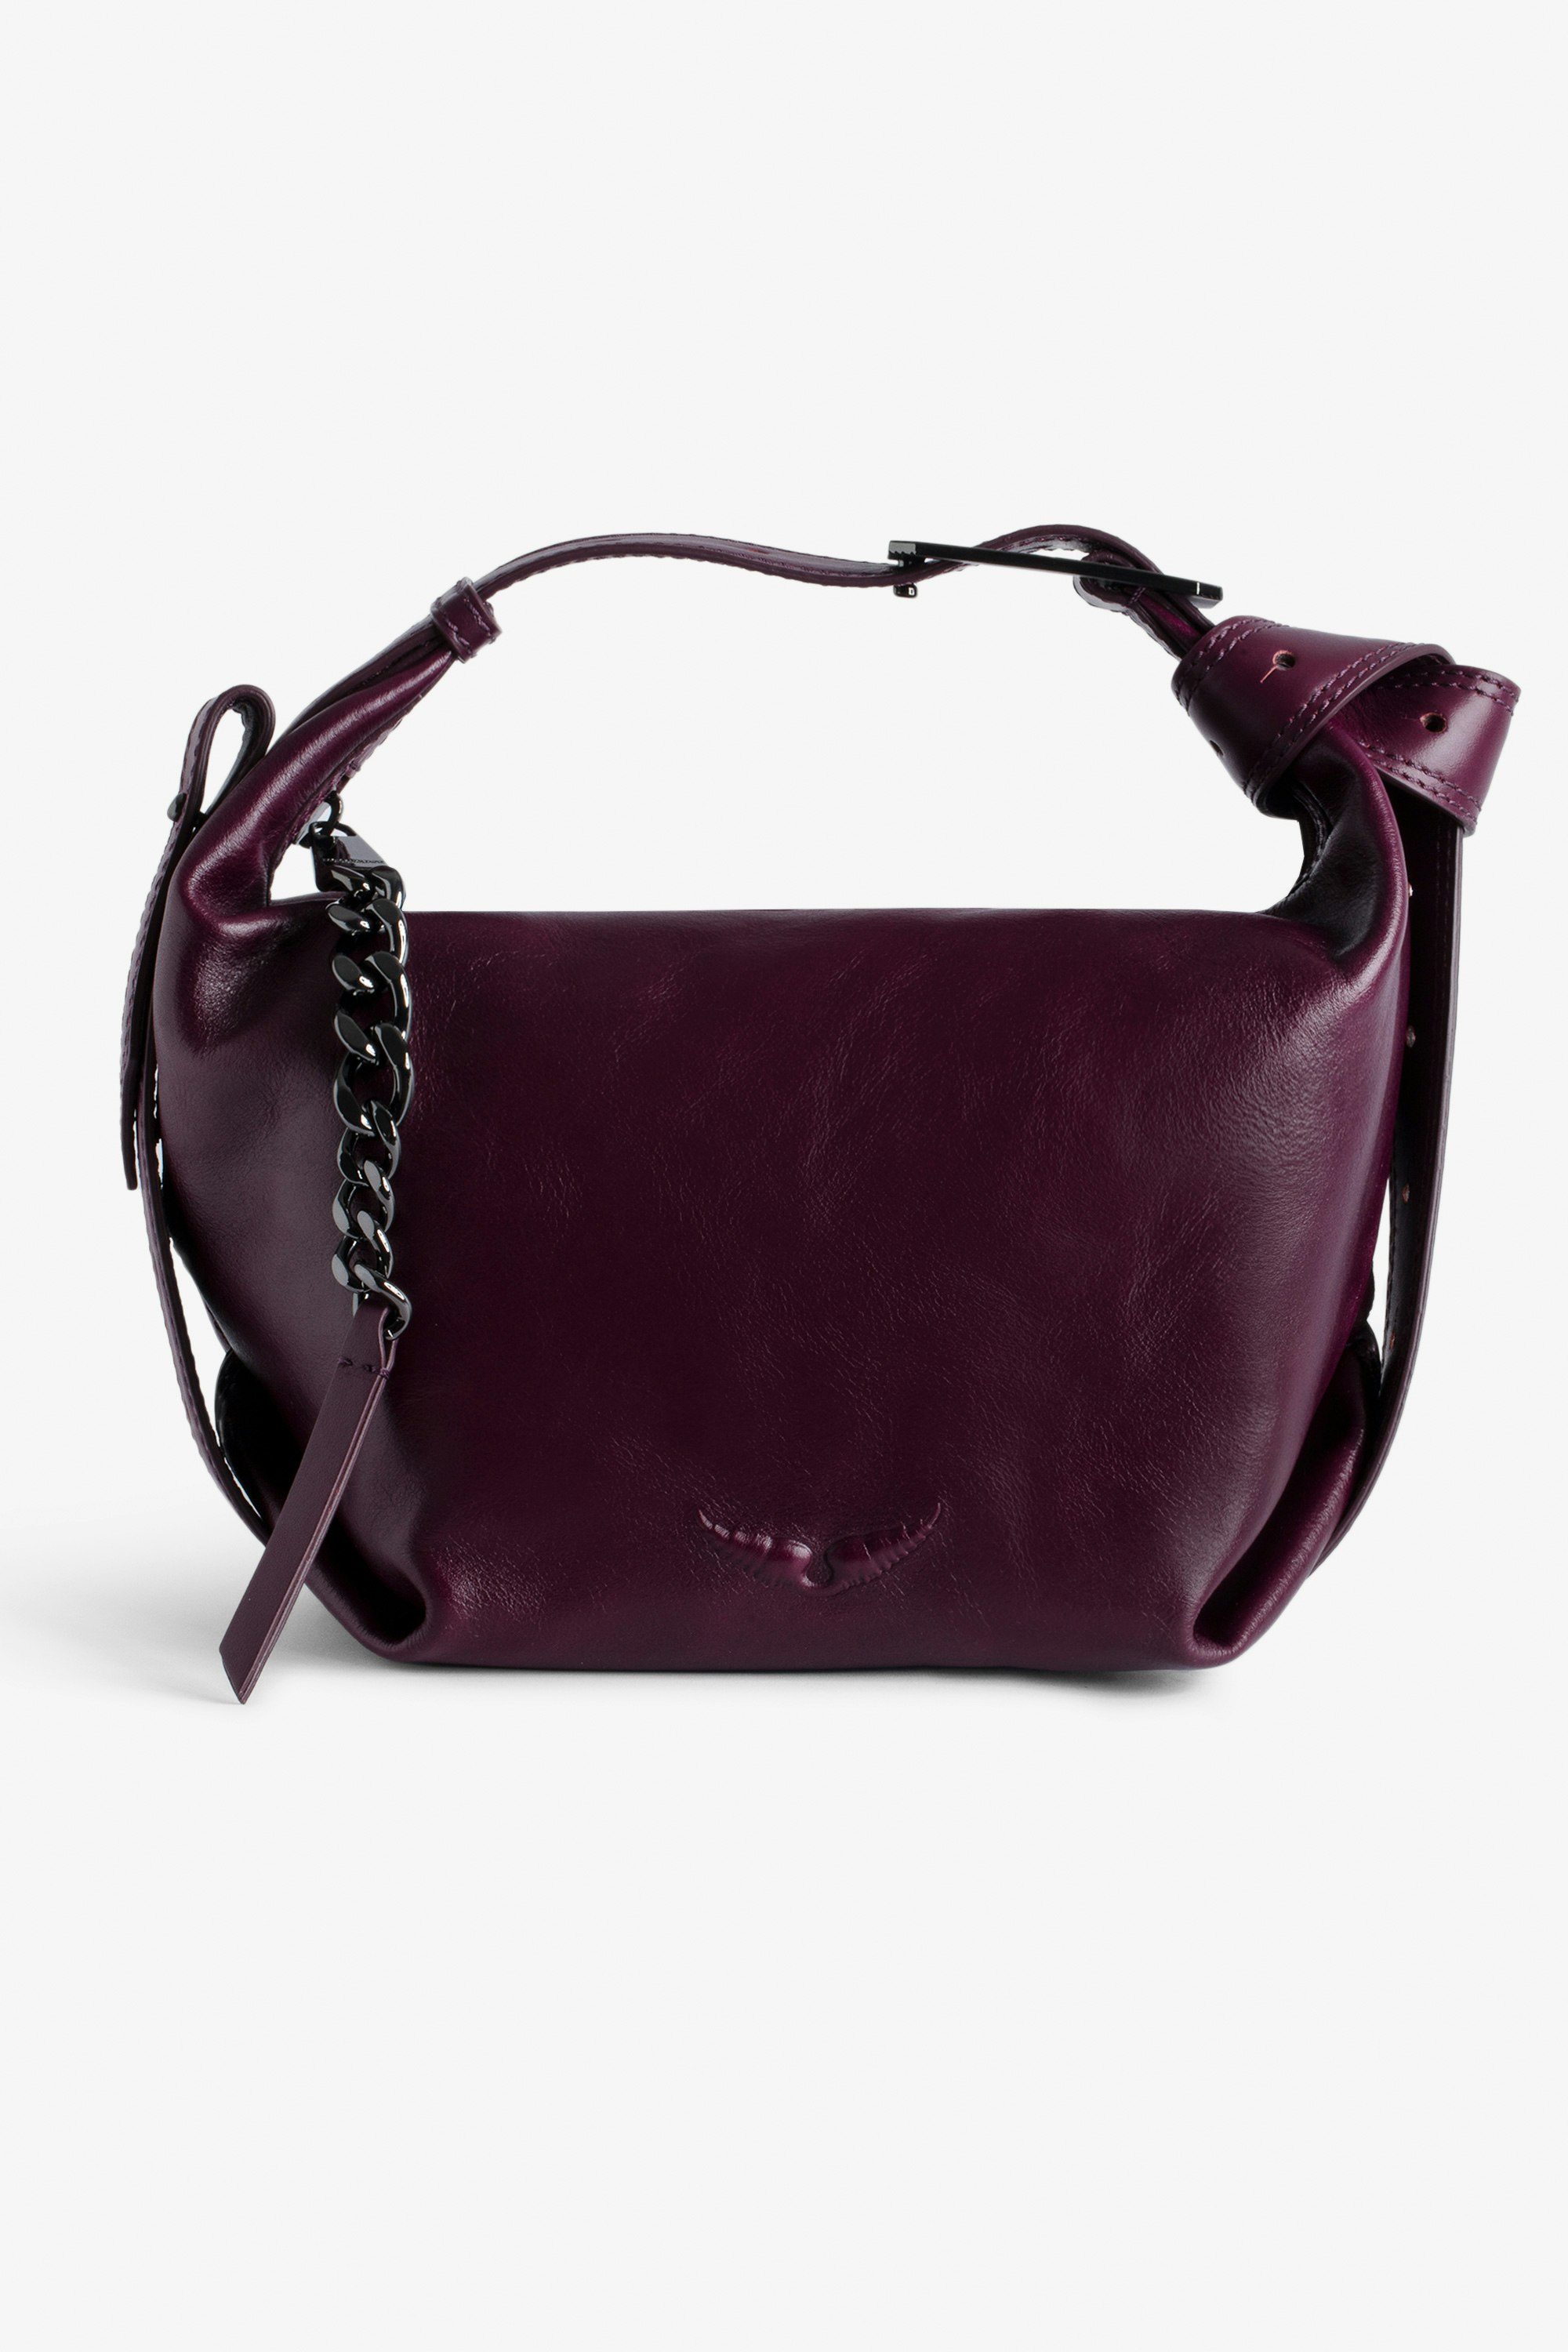 Le Cecilia バッグ - Woman’s burgundy vegetable-tanned leather bag with shoulder strap and metal C buckle